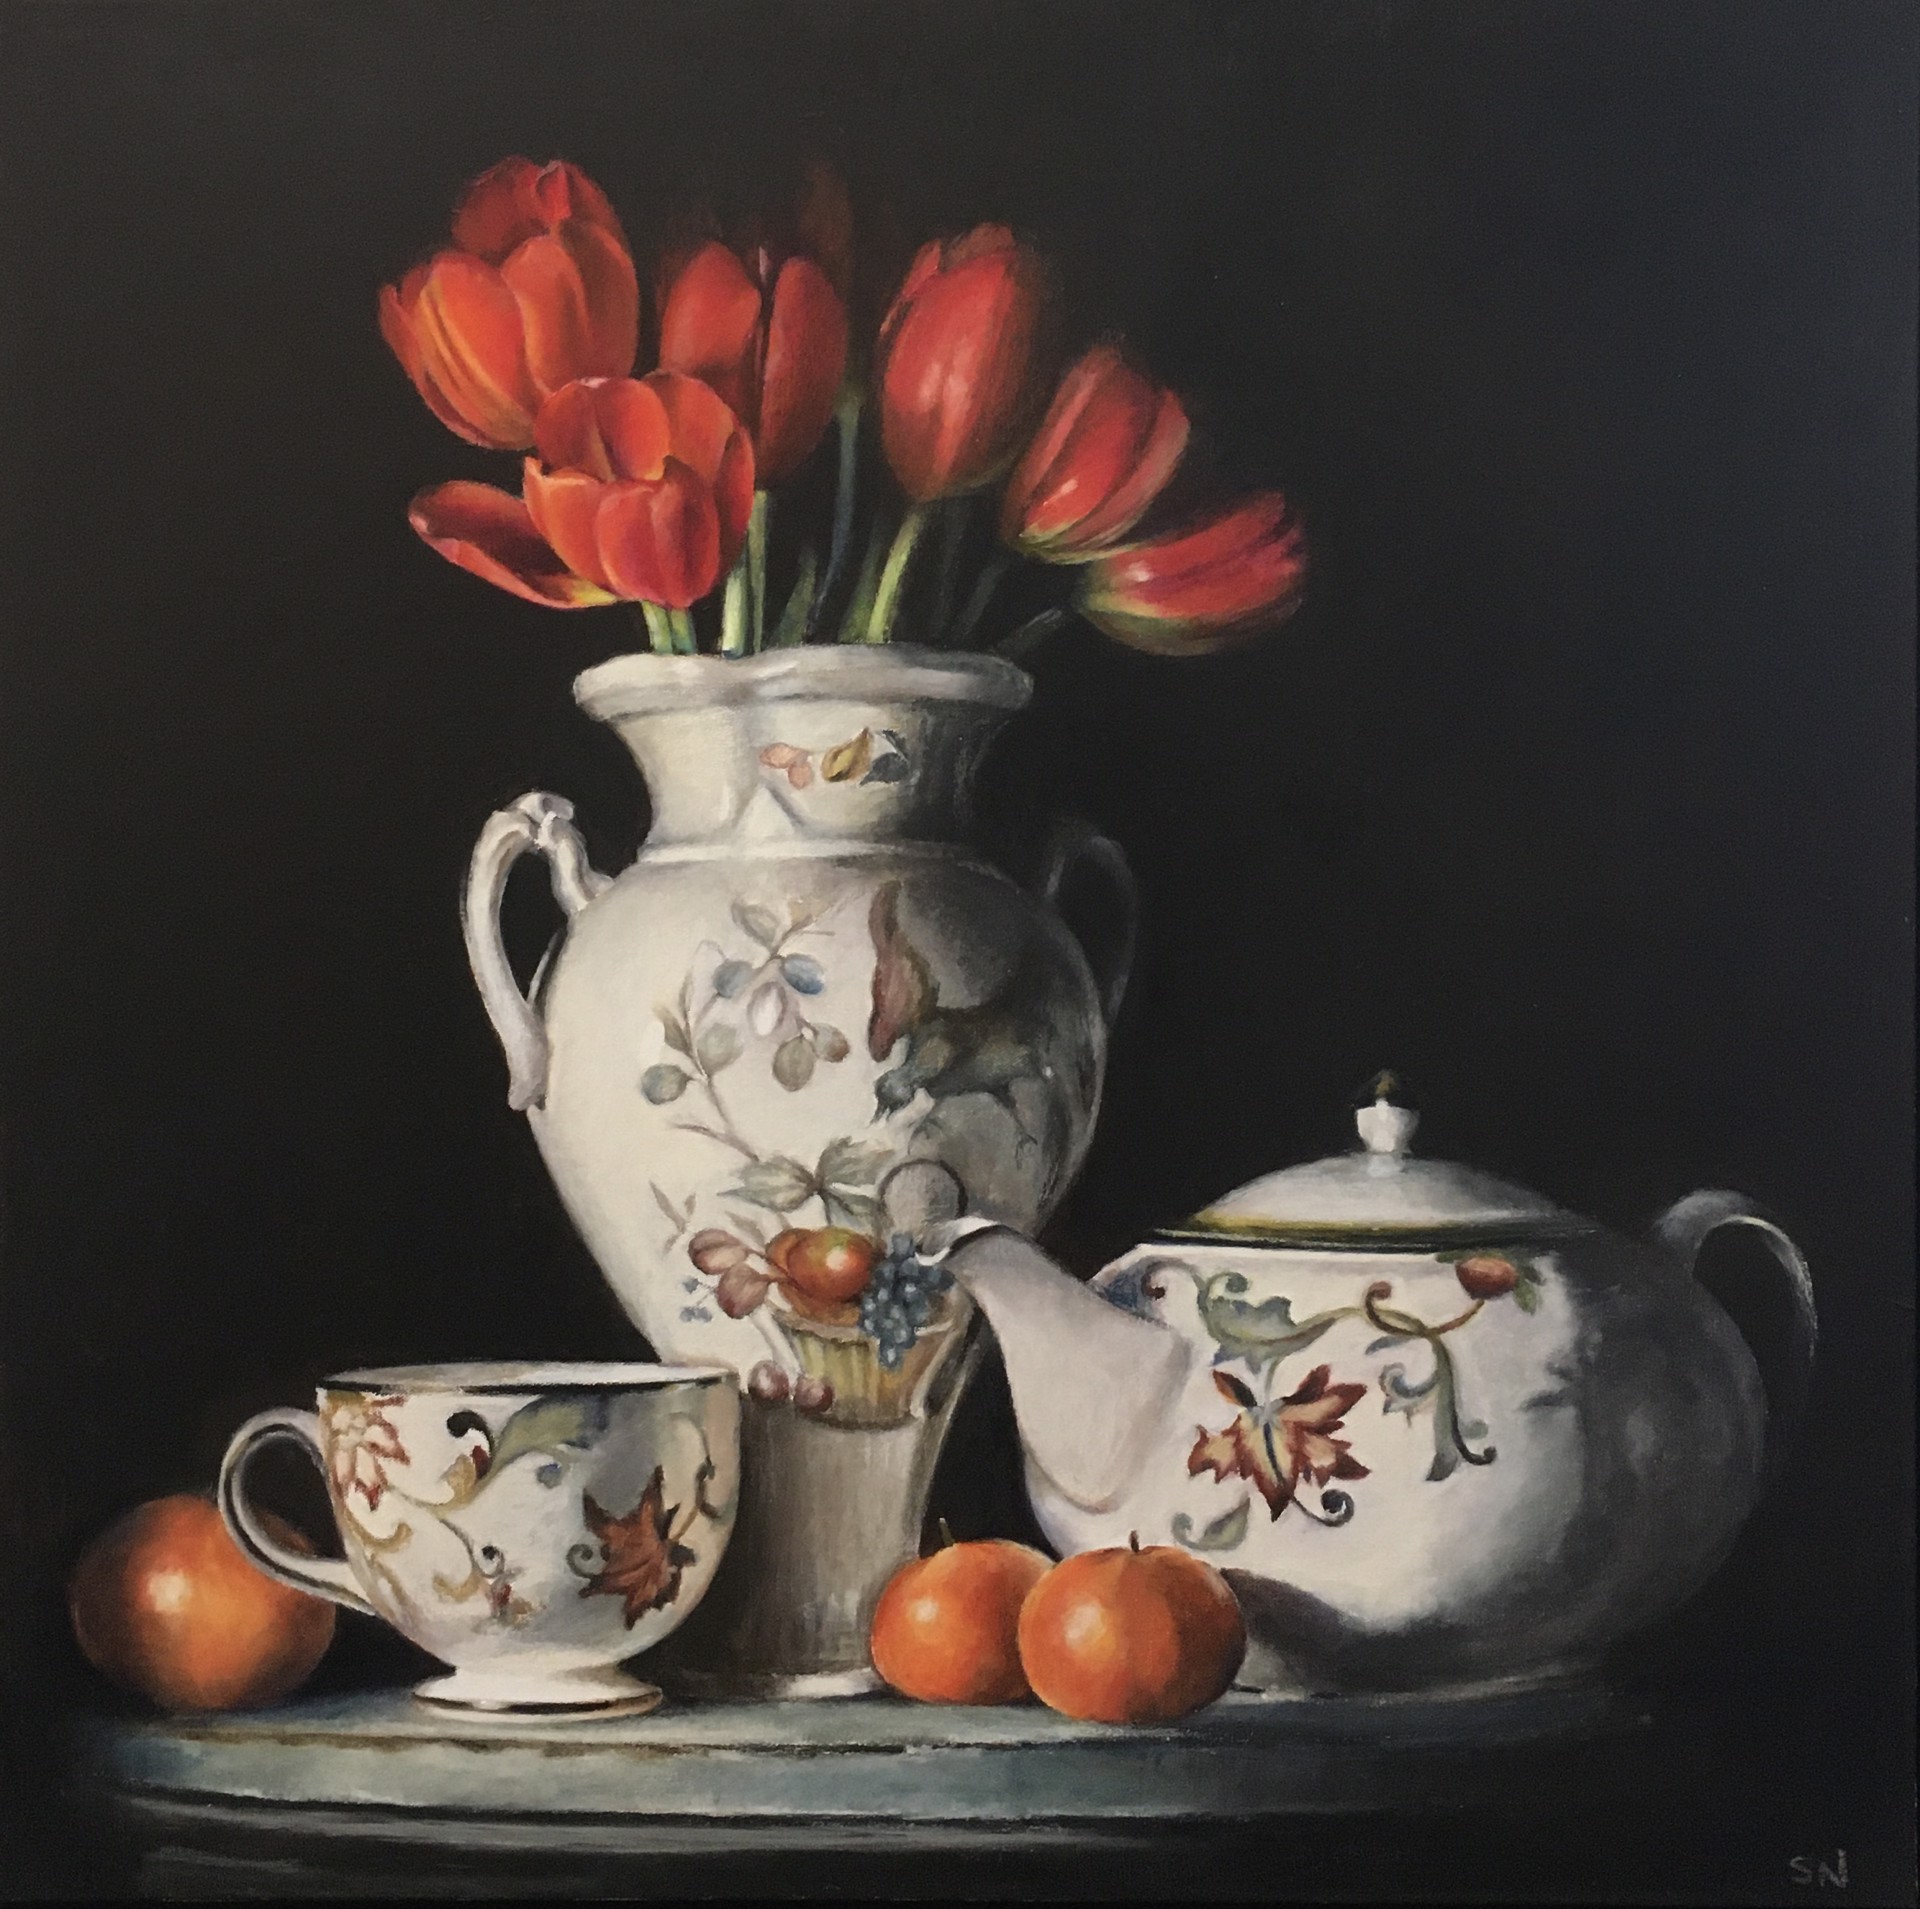 Teapot, Tulips, and Tangerines by Stephanie Neely